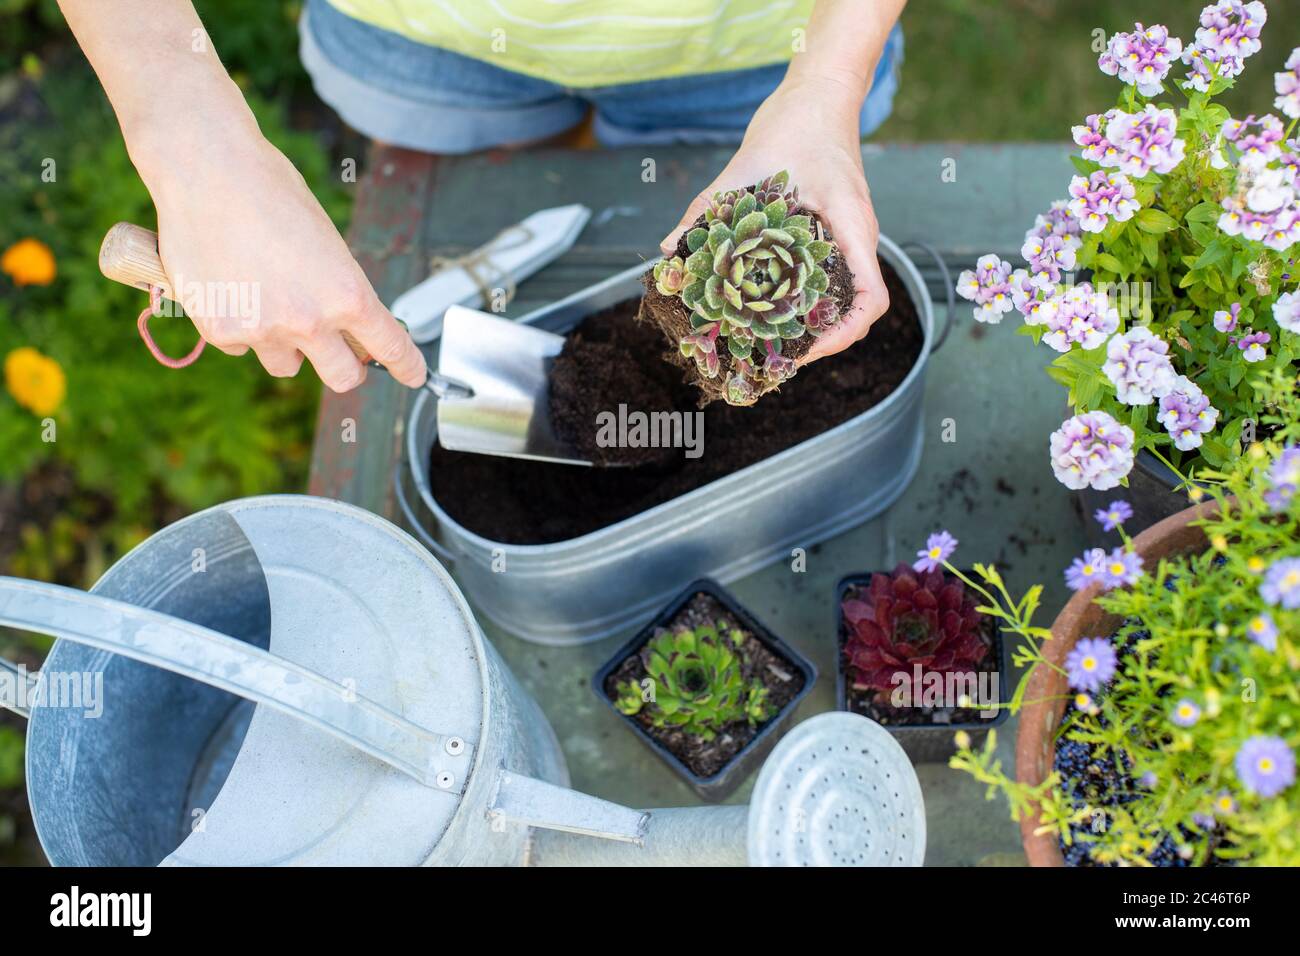 Overhead Close Up Of Woman Gardening At Home Planting Succulent Plants In Metal Planter Outdoors Stock Photo